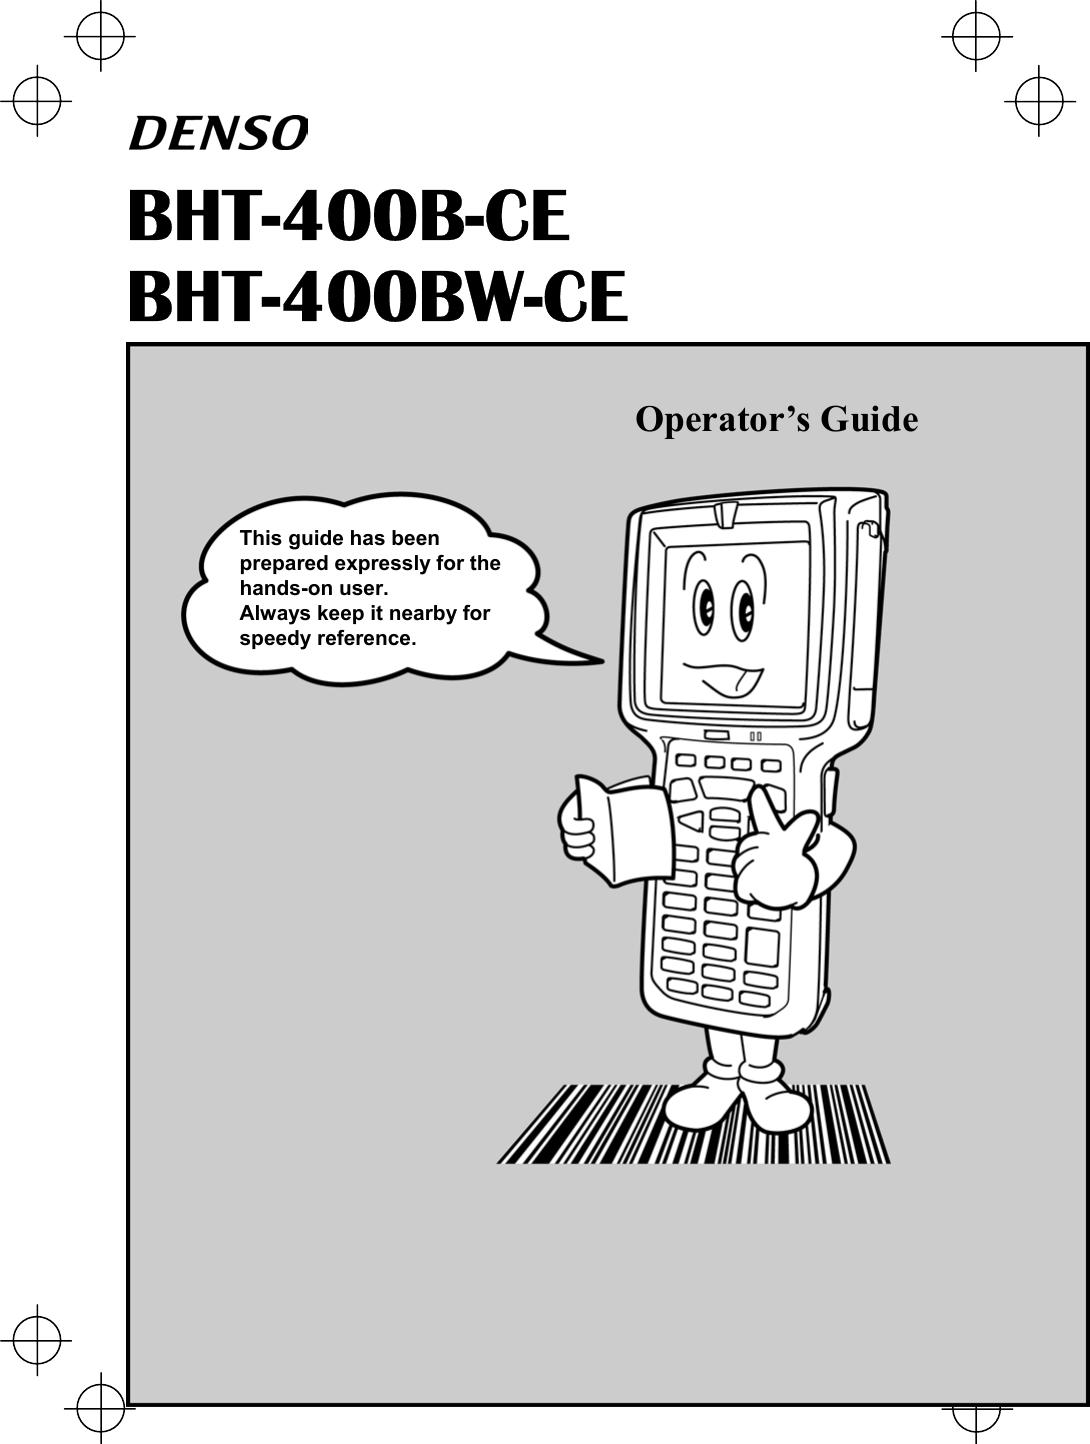                                                  BHT-400B-CE BHT-400BW-CE This guide has been prepared expressly for the hands-on user. Always keep it nearby for speedy reference. Operator’s Guide 